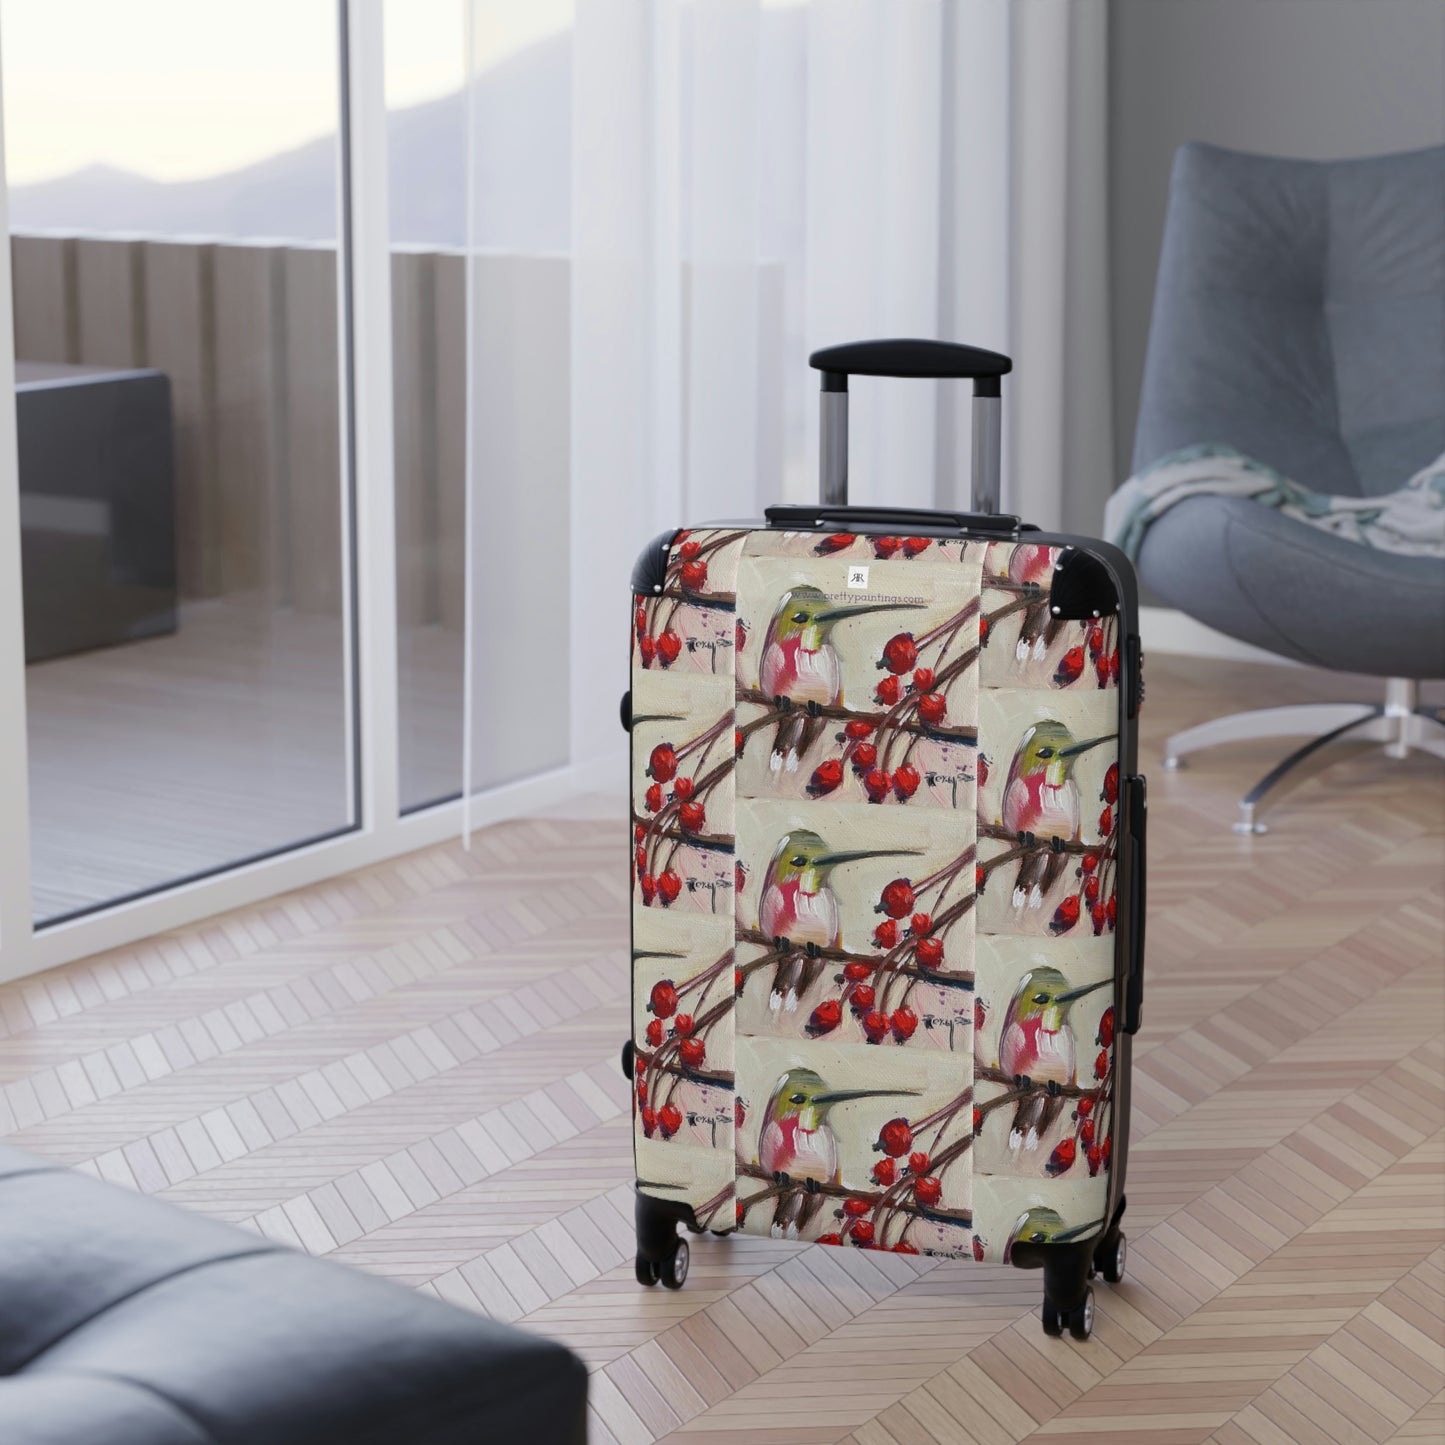 Hummingbird with Berries Patterned Carry on Suitcase (three sizes available)